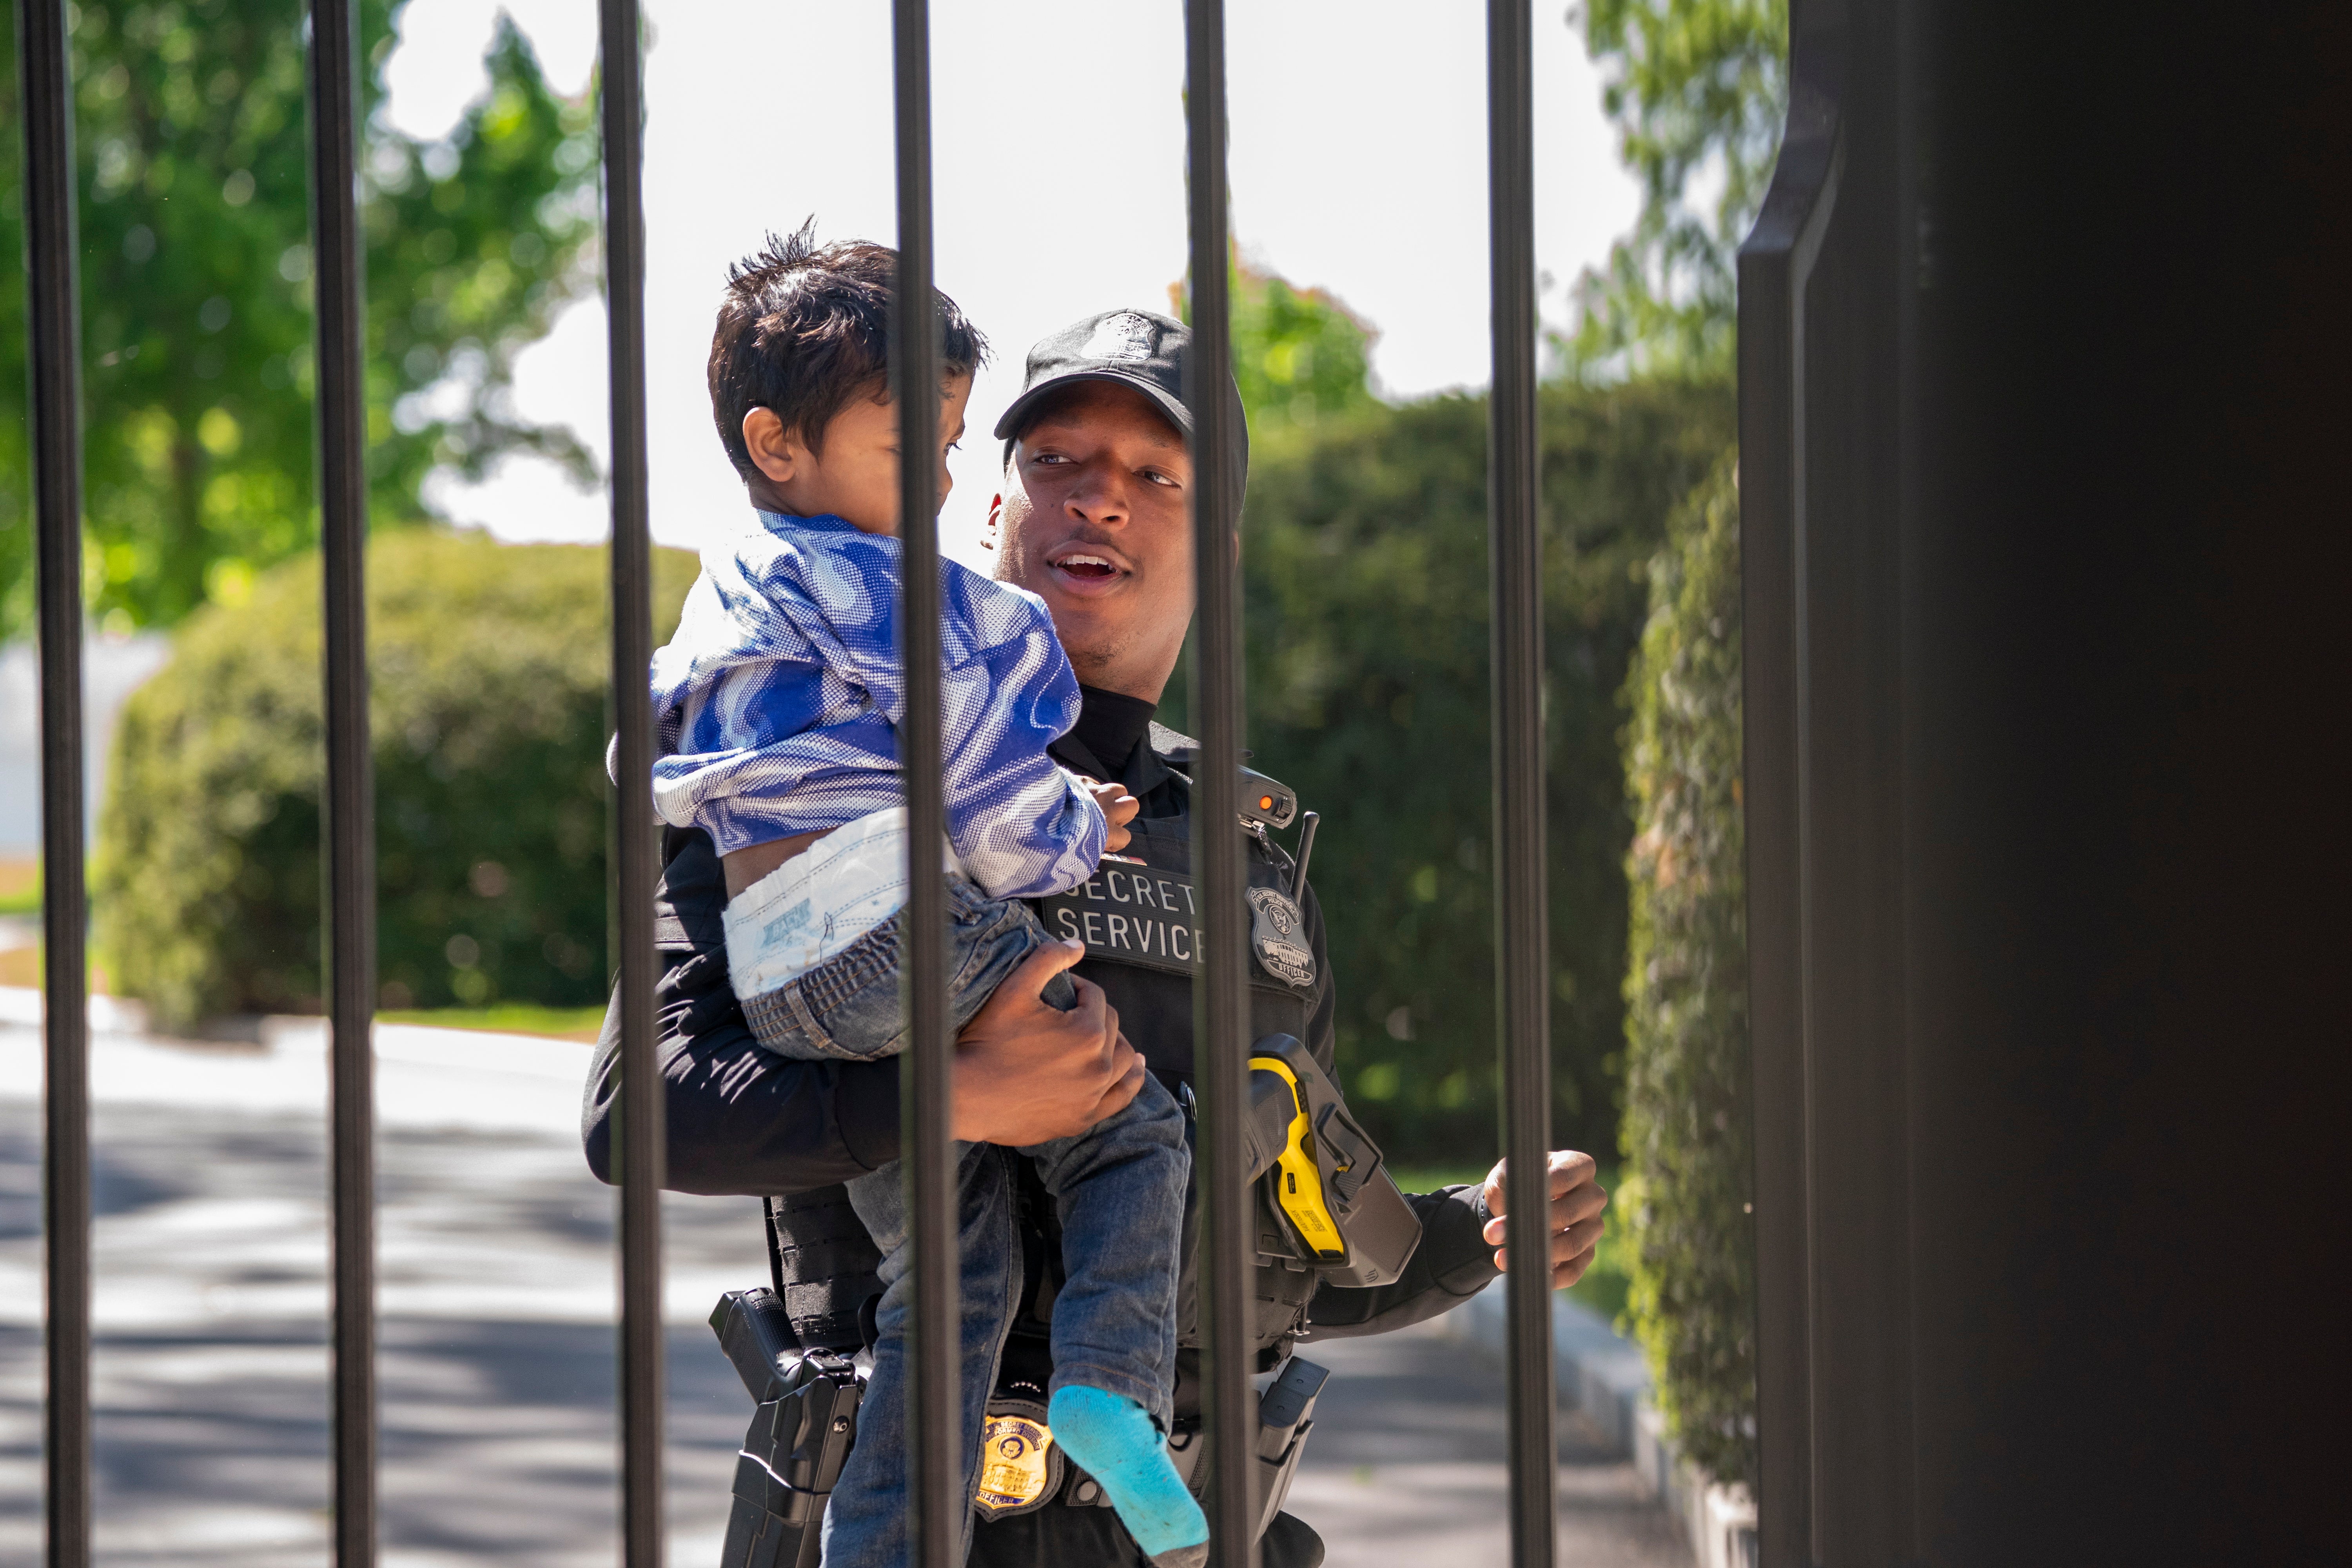 A US Secret Service uniformed division police officer carries a child that climbed through the bars of the White House fence on 18 April 2023